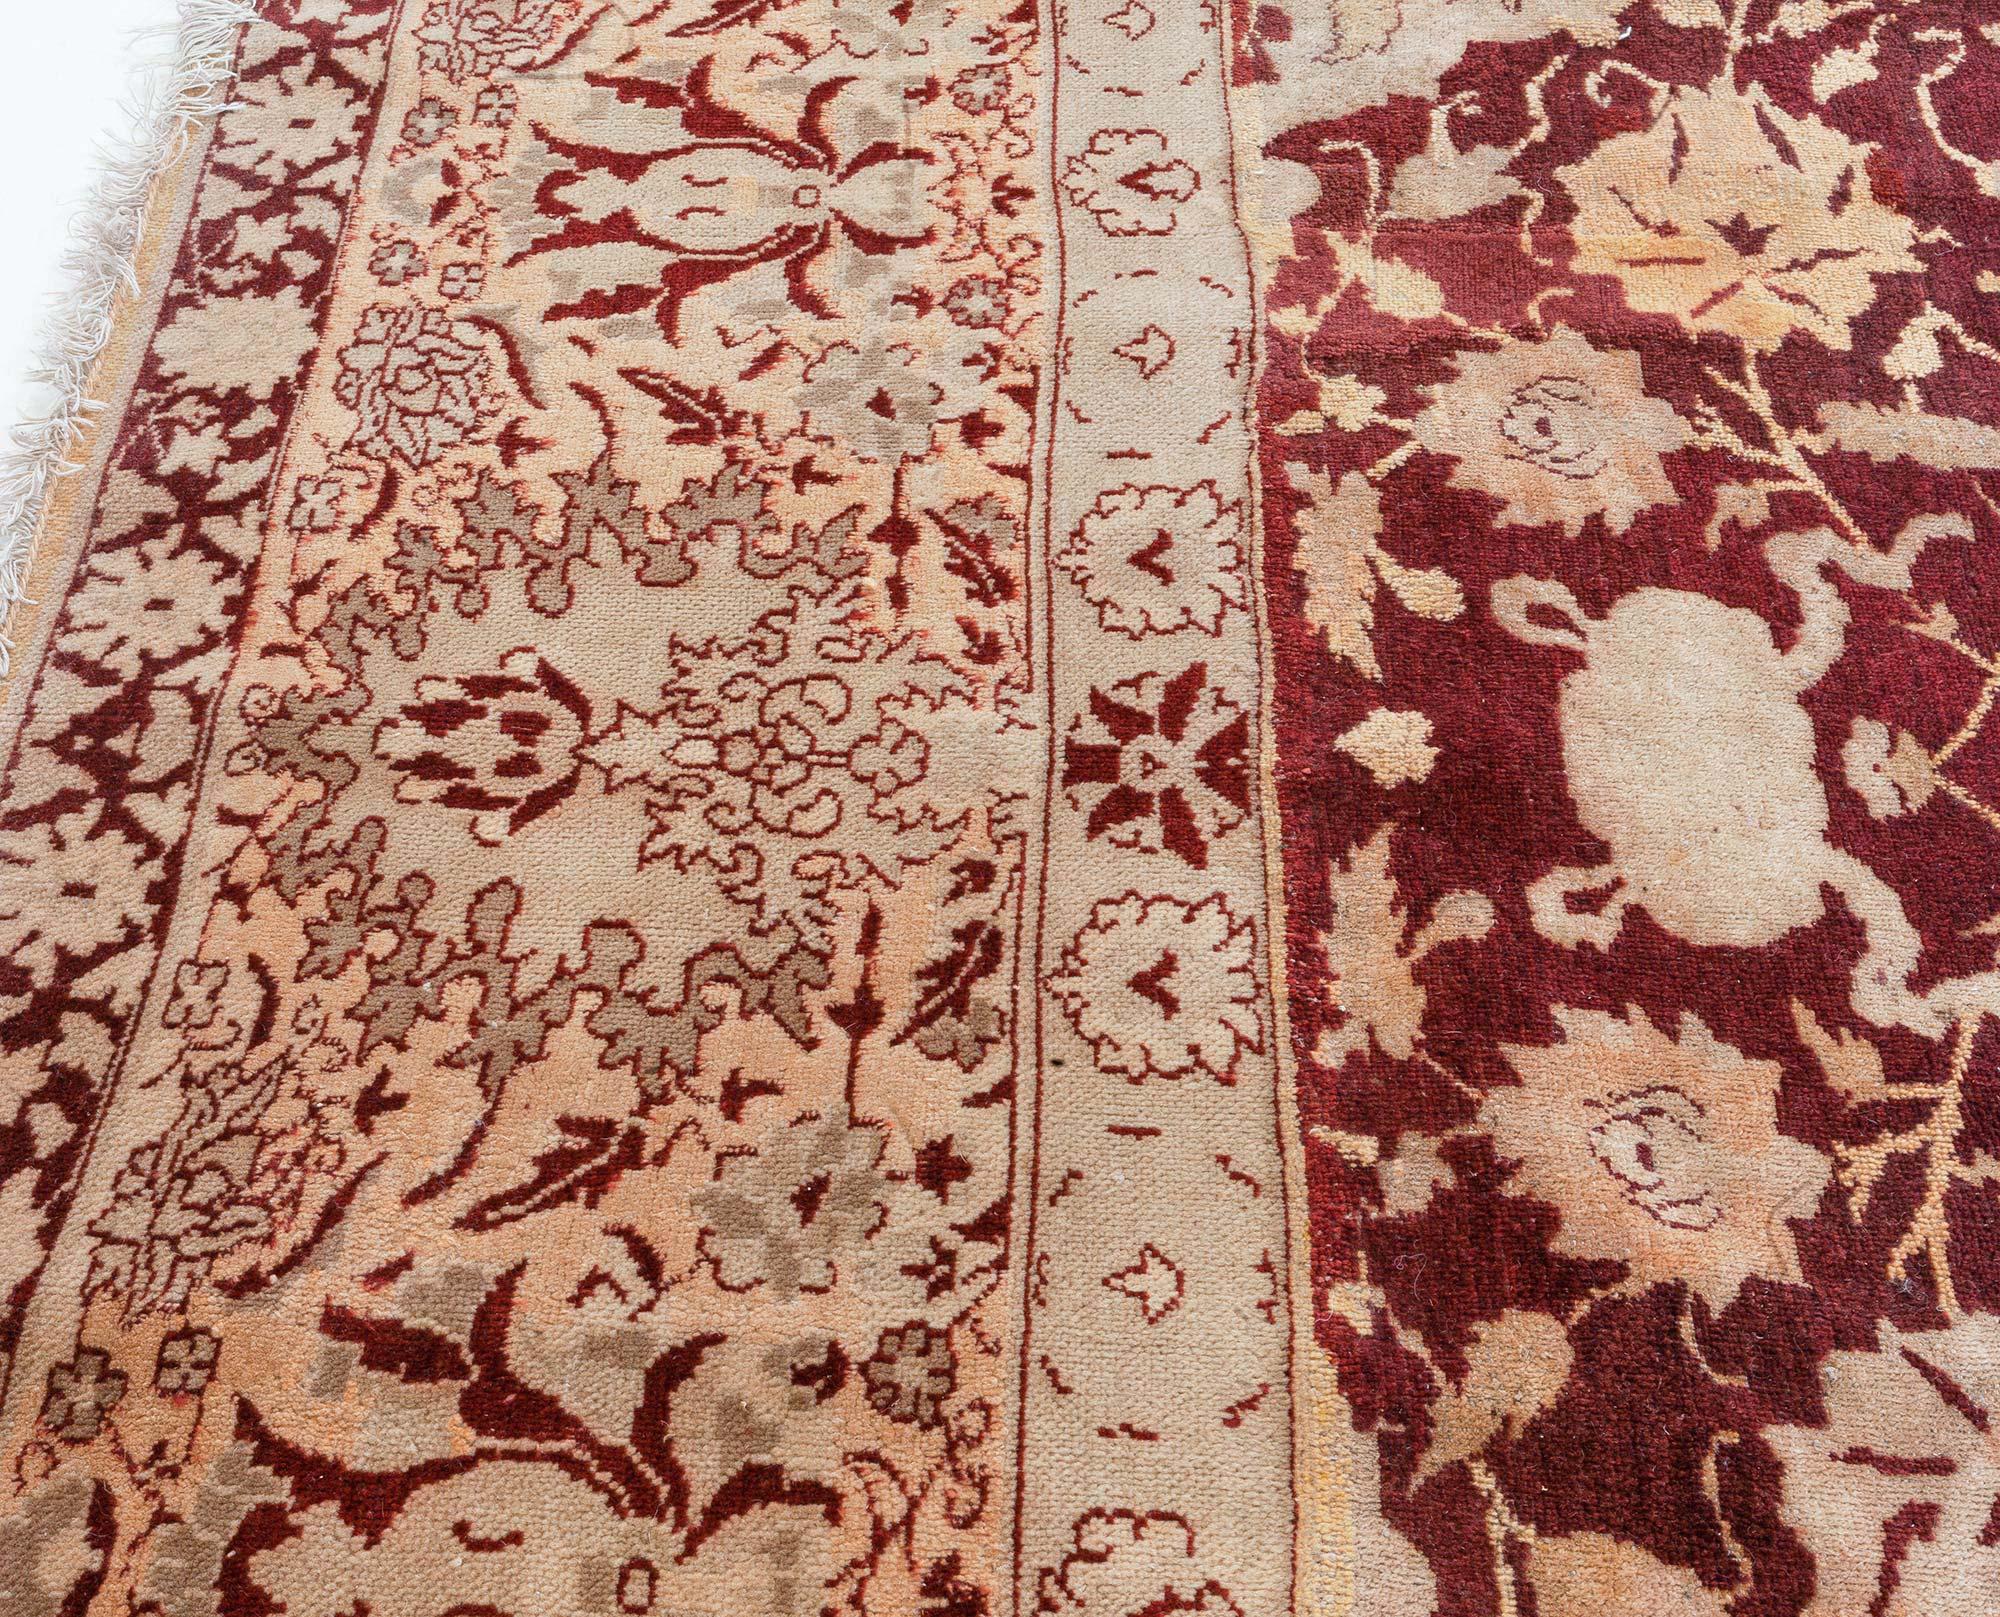 Antique Indian Amritsar Red and Beige Wool Carpet 4